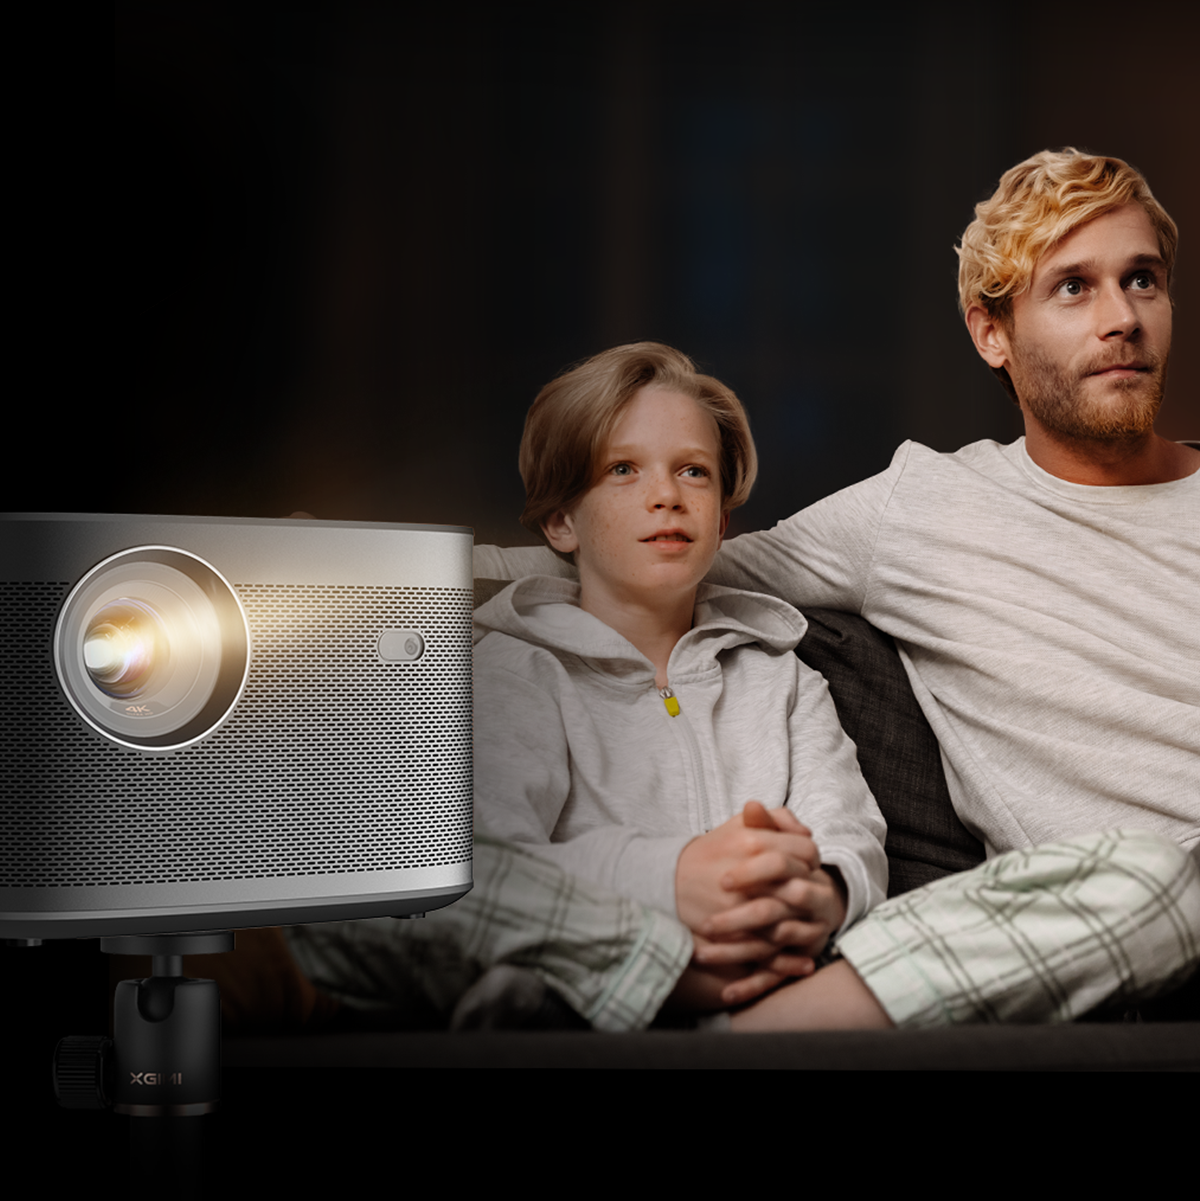 Get a Safe and Healthy Environment for Kids with an LED Projector